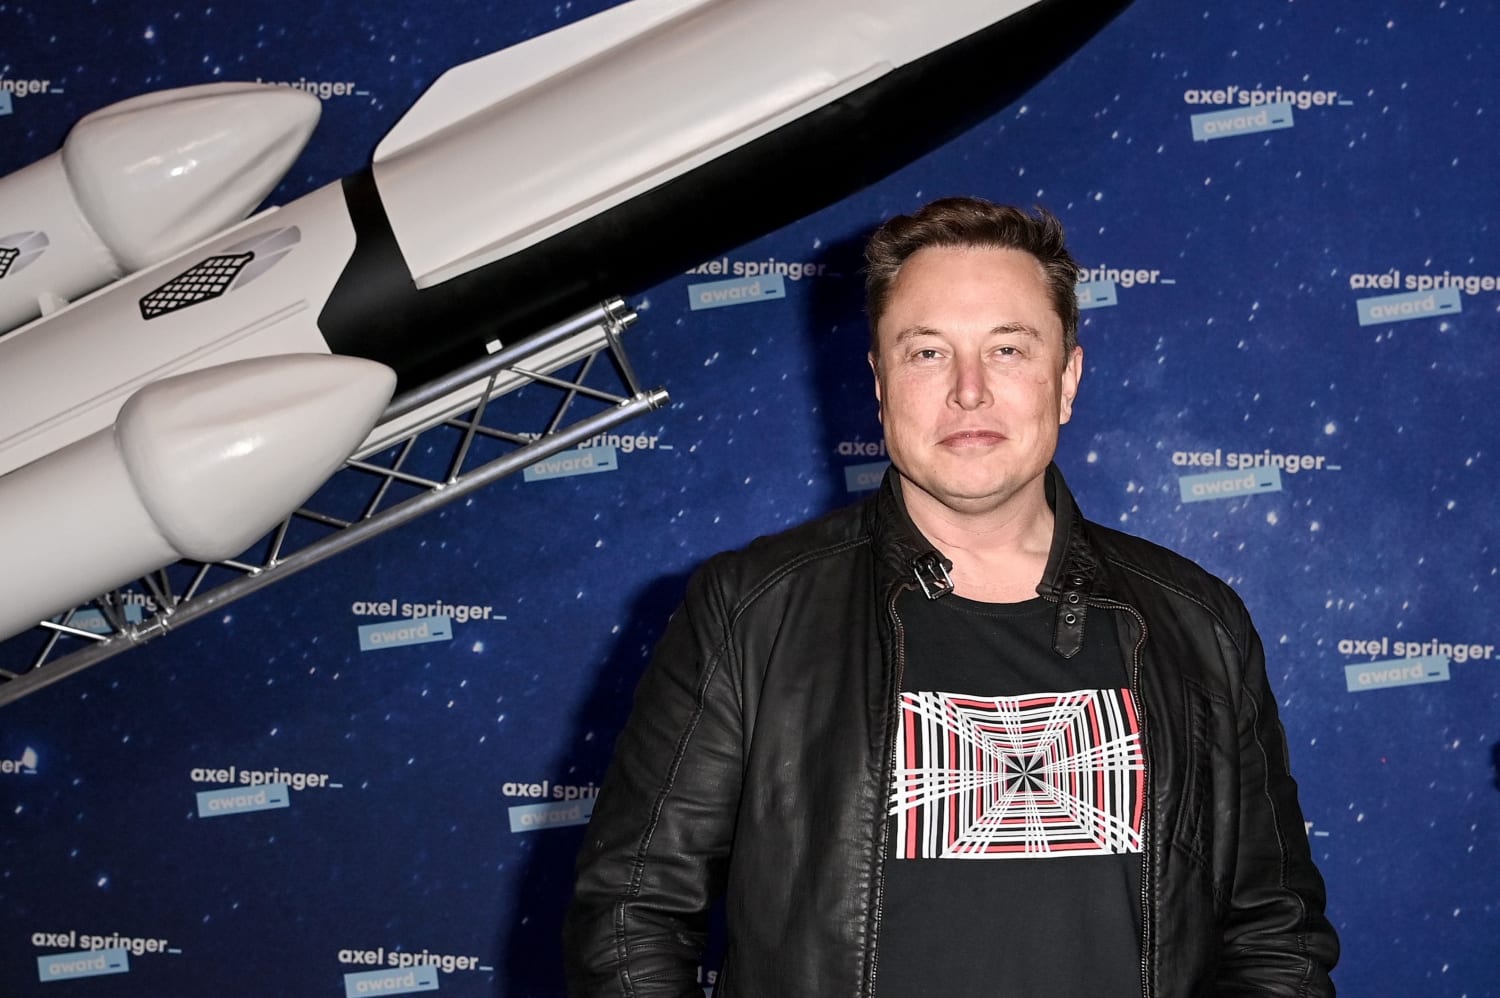 Why Elon Musk And Other Tech Billionaires Are Leaving Silicon Valley For Texas